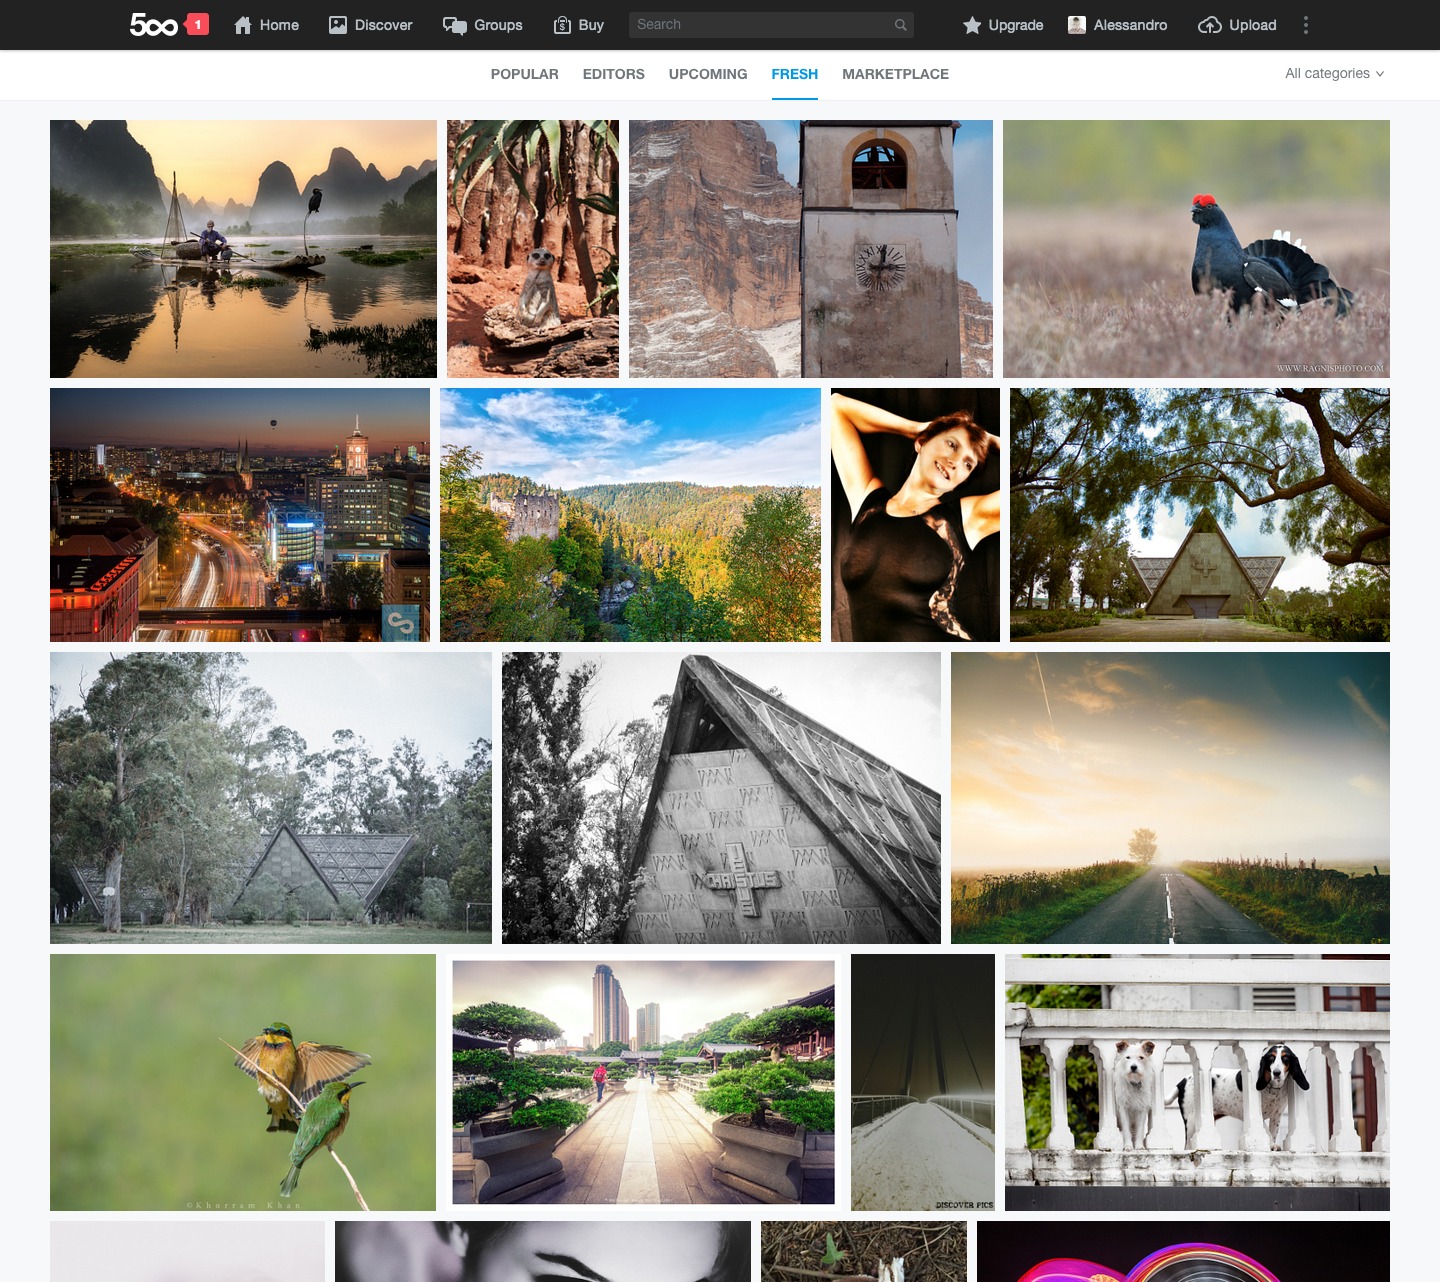 Introducing A Brand New 500px Profile Photo Page And Discover Experience 500px